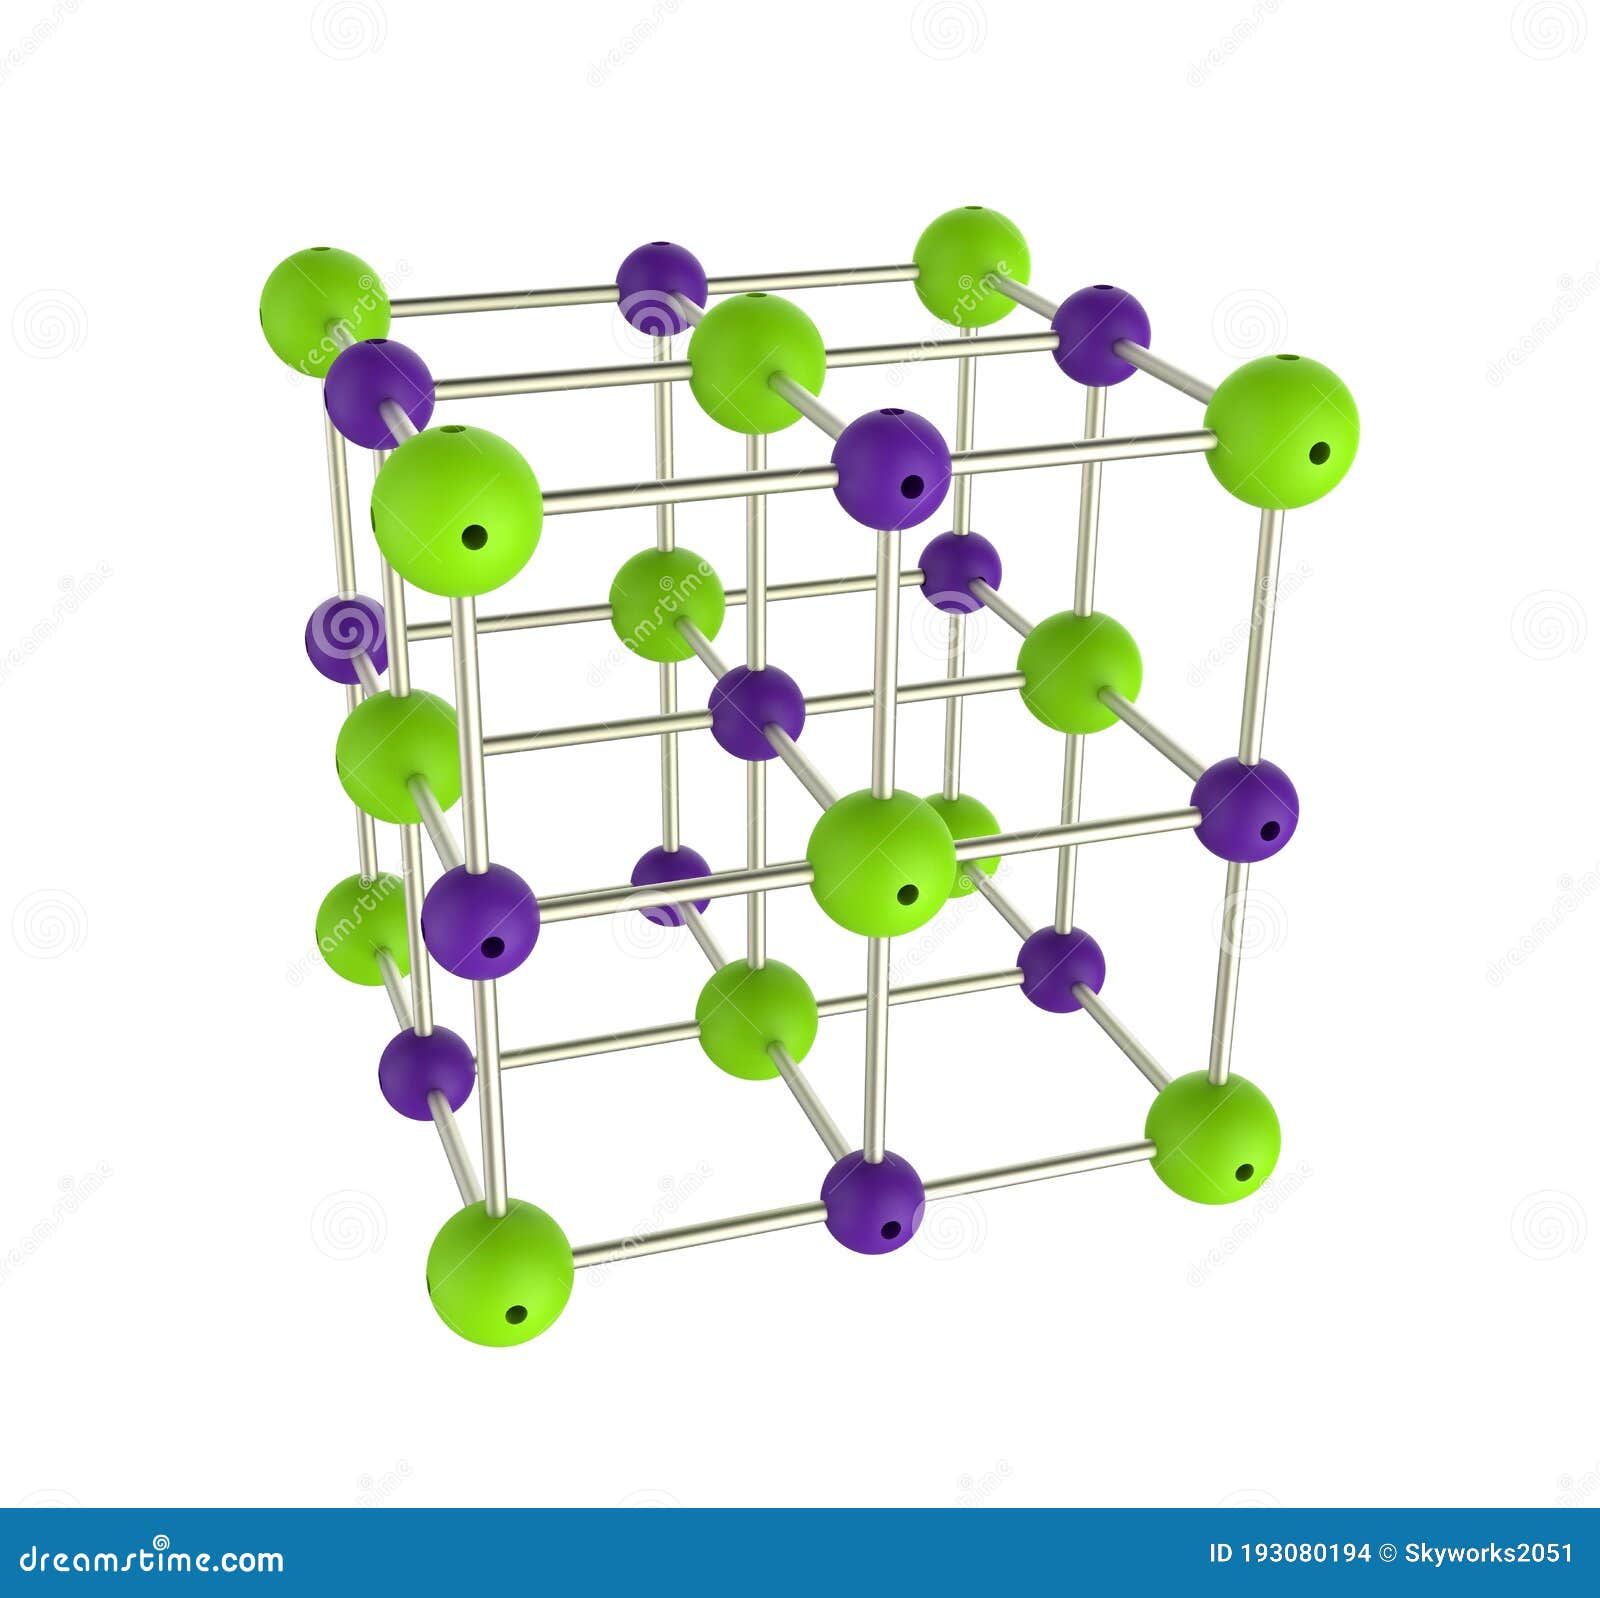 fcc structure of nacl - crystal lattice.